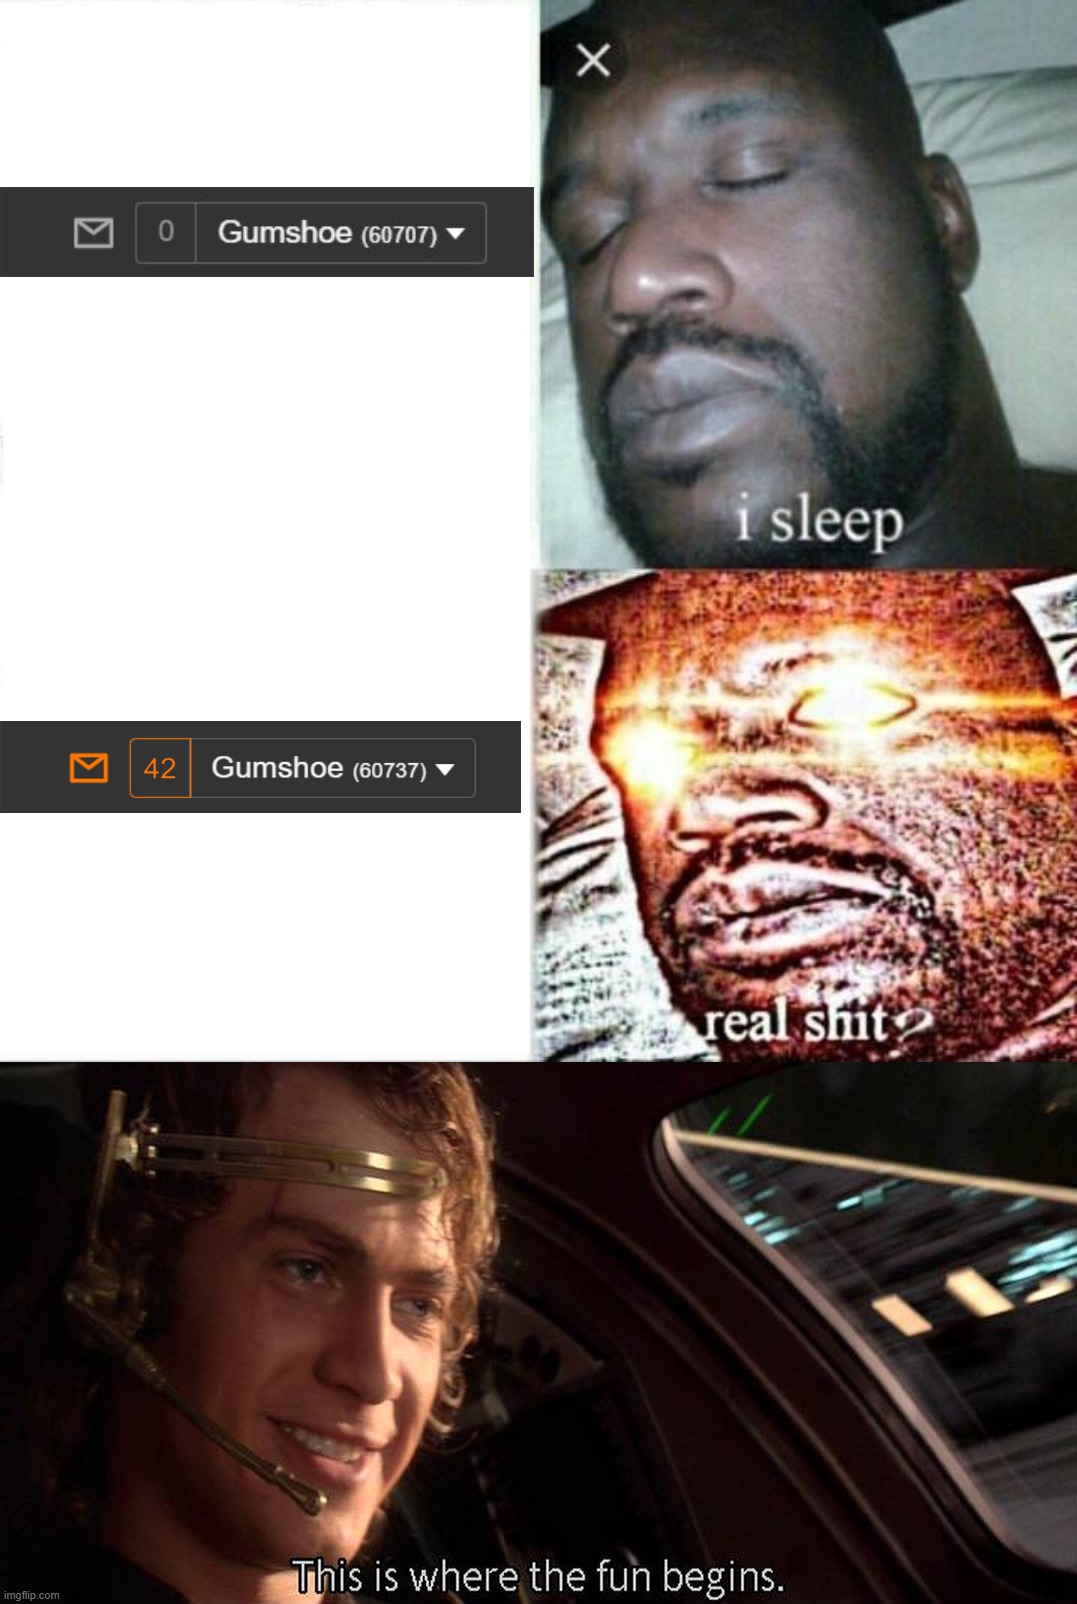 What it's like leaving just five comments on ImgFlip before bed. | image tagged in memes,sleeping shaq,this is where the fun begins,imgflip,comments | made w/ Imgflip meme maker